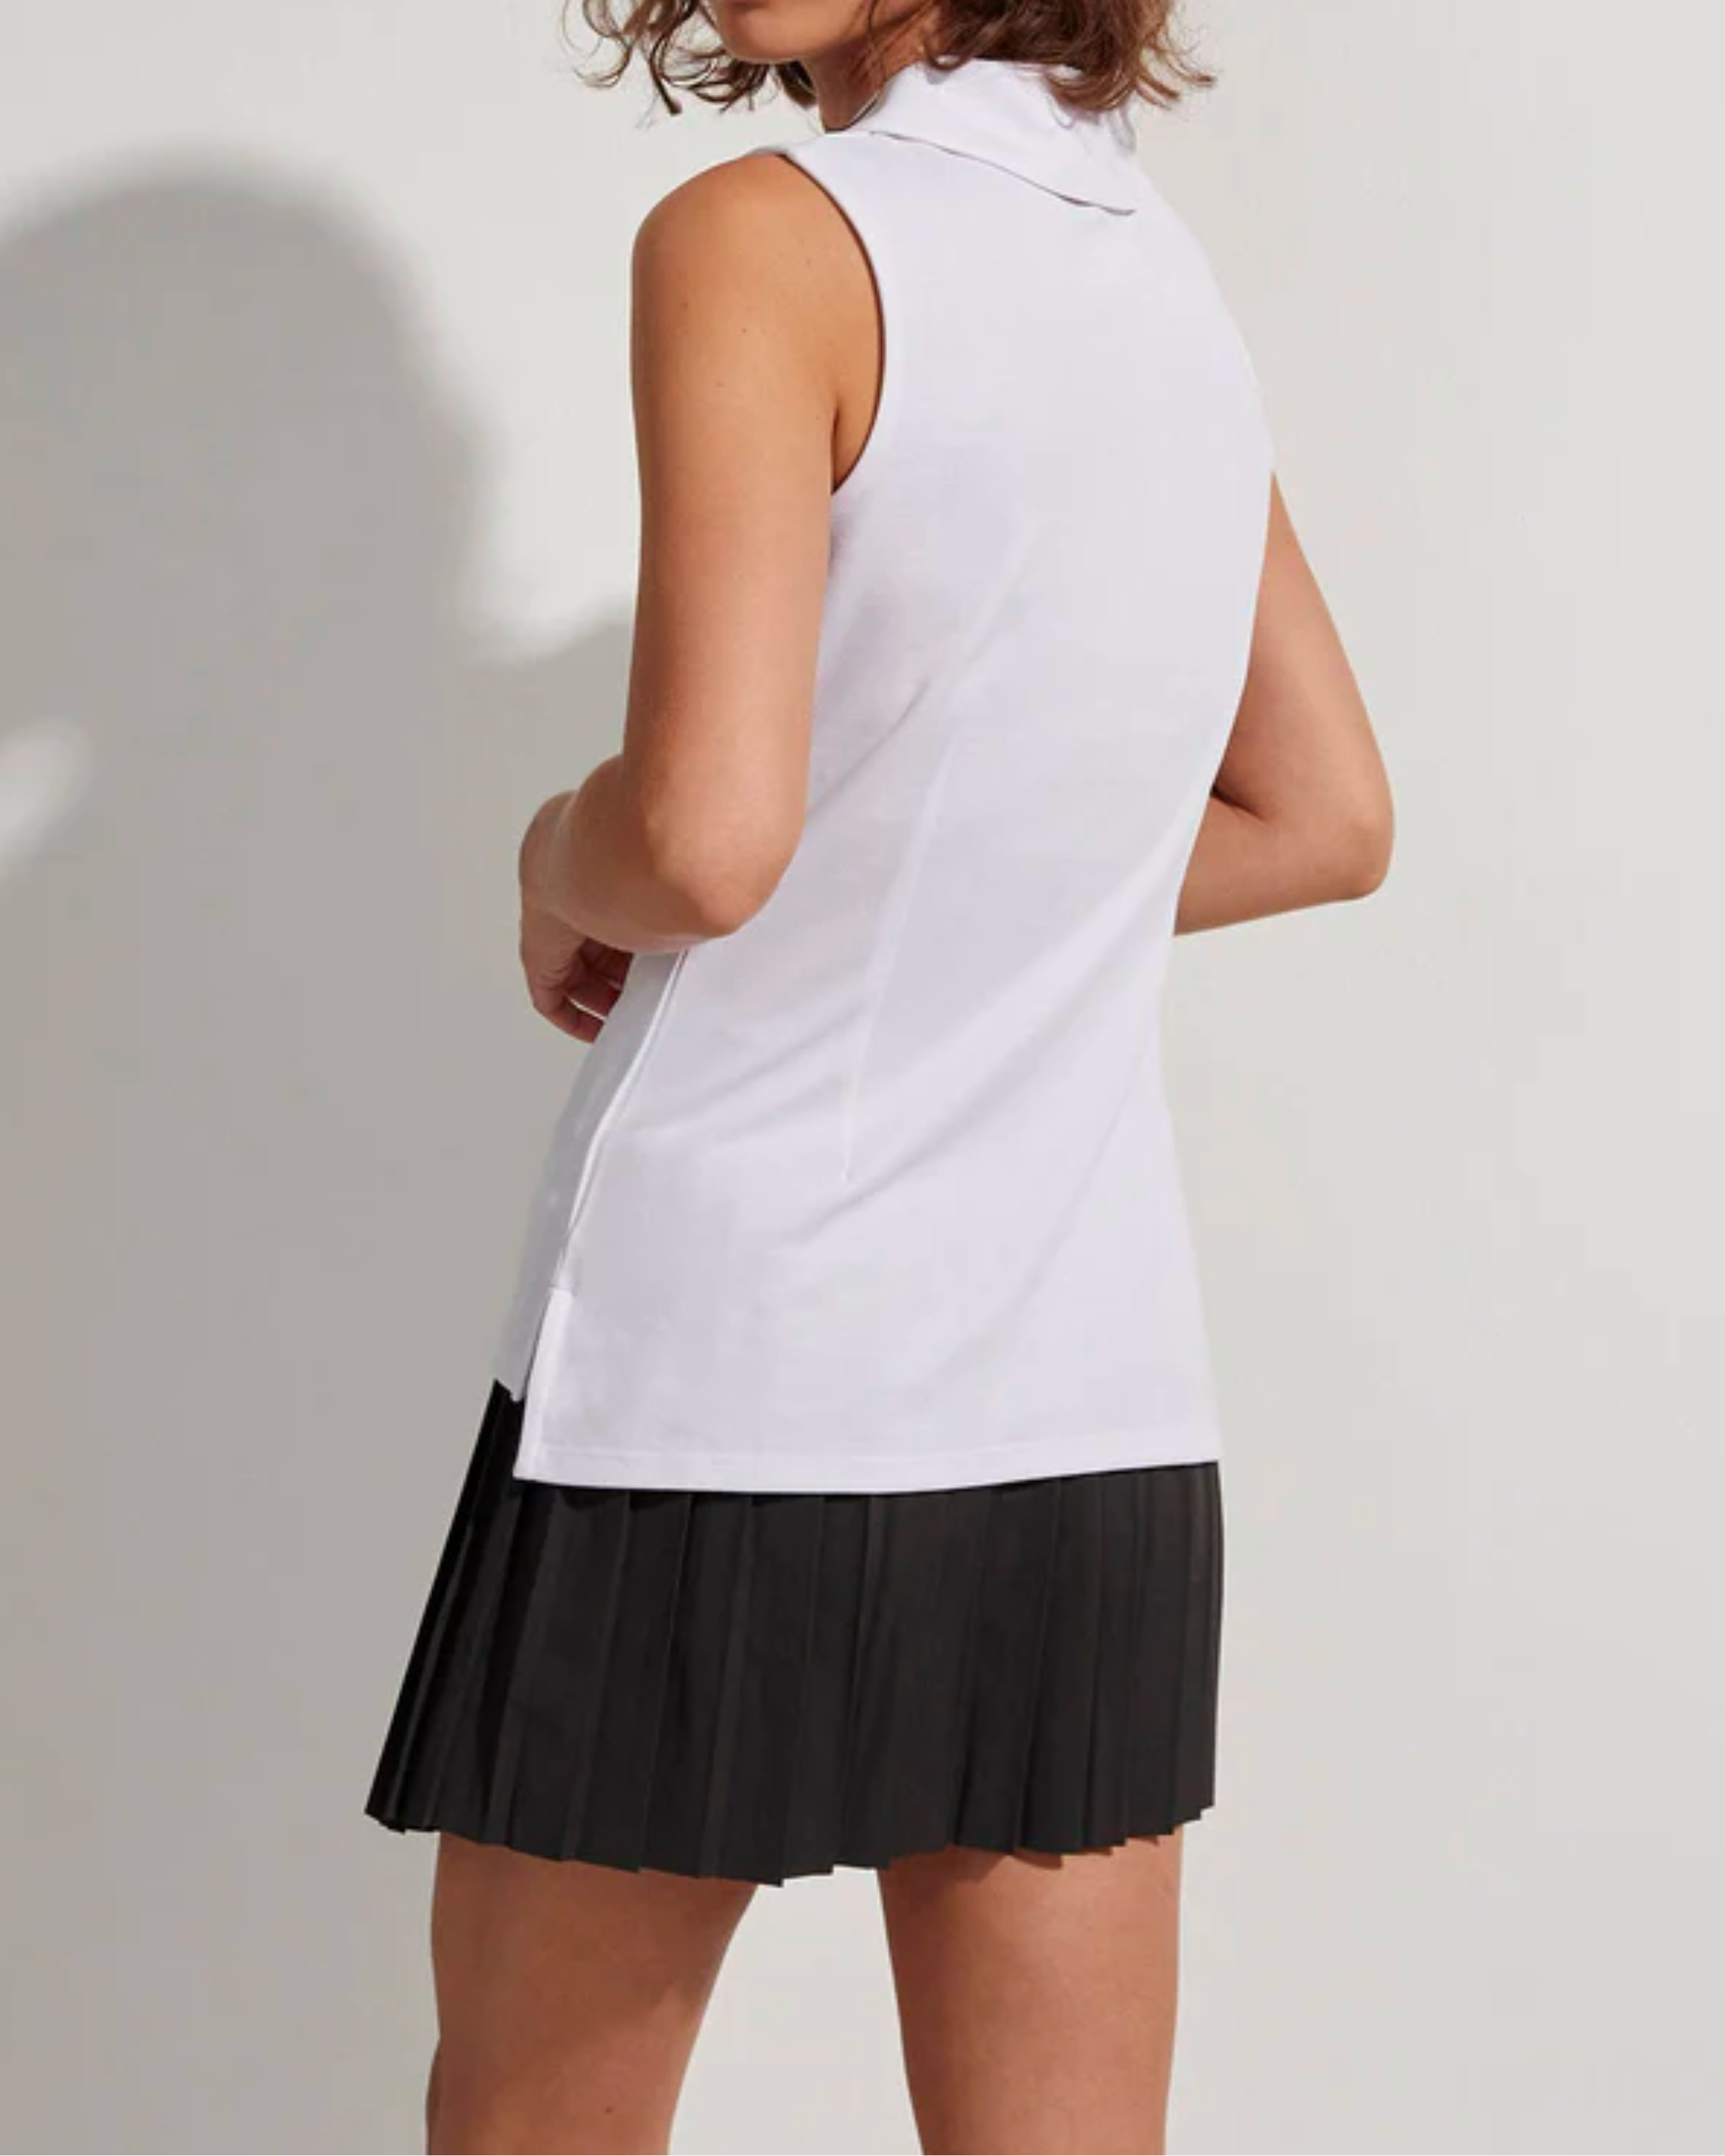 Varley Caine Sleeveless Polo in White